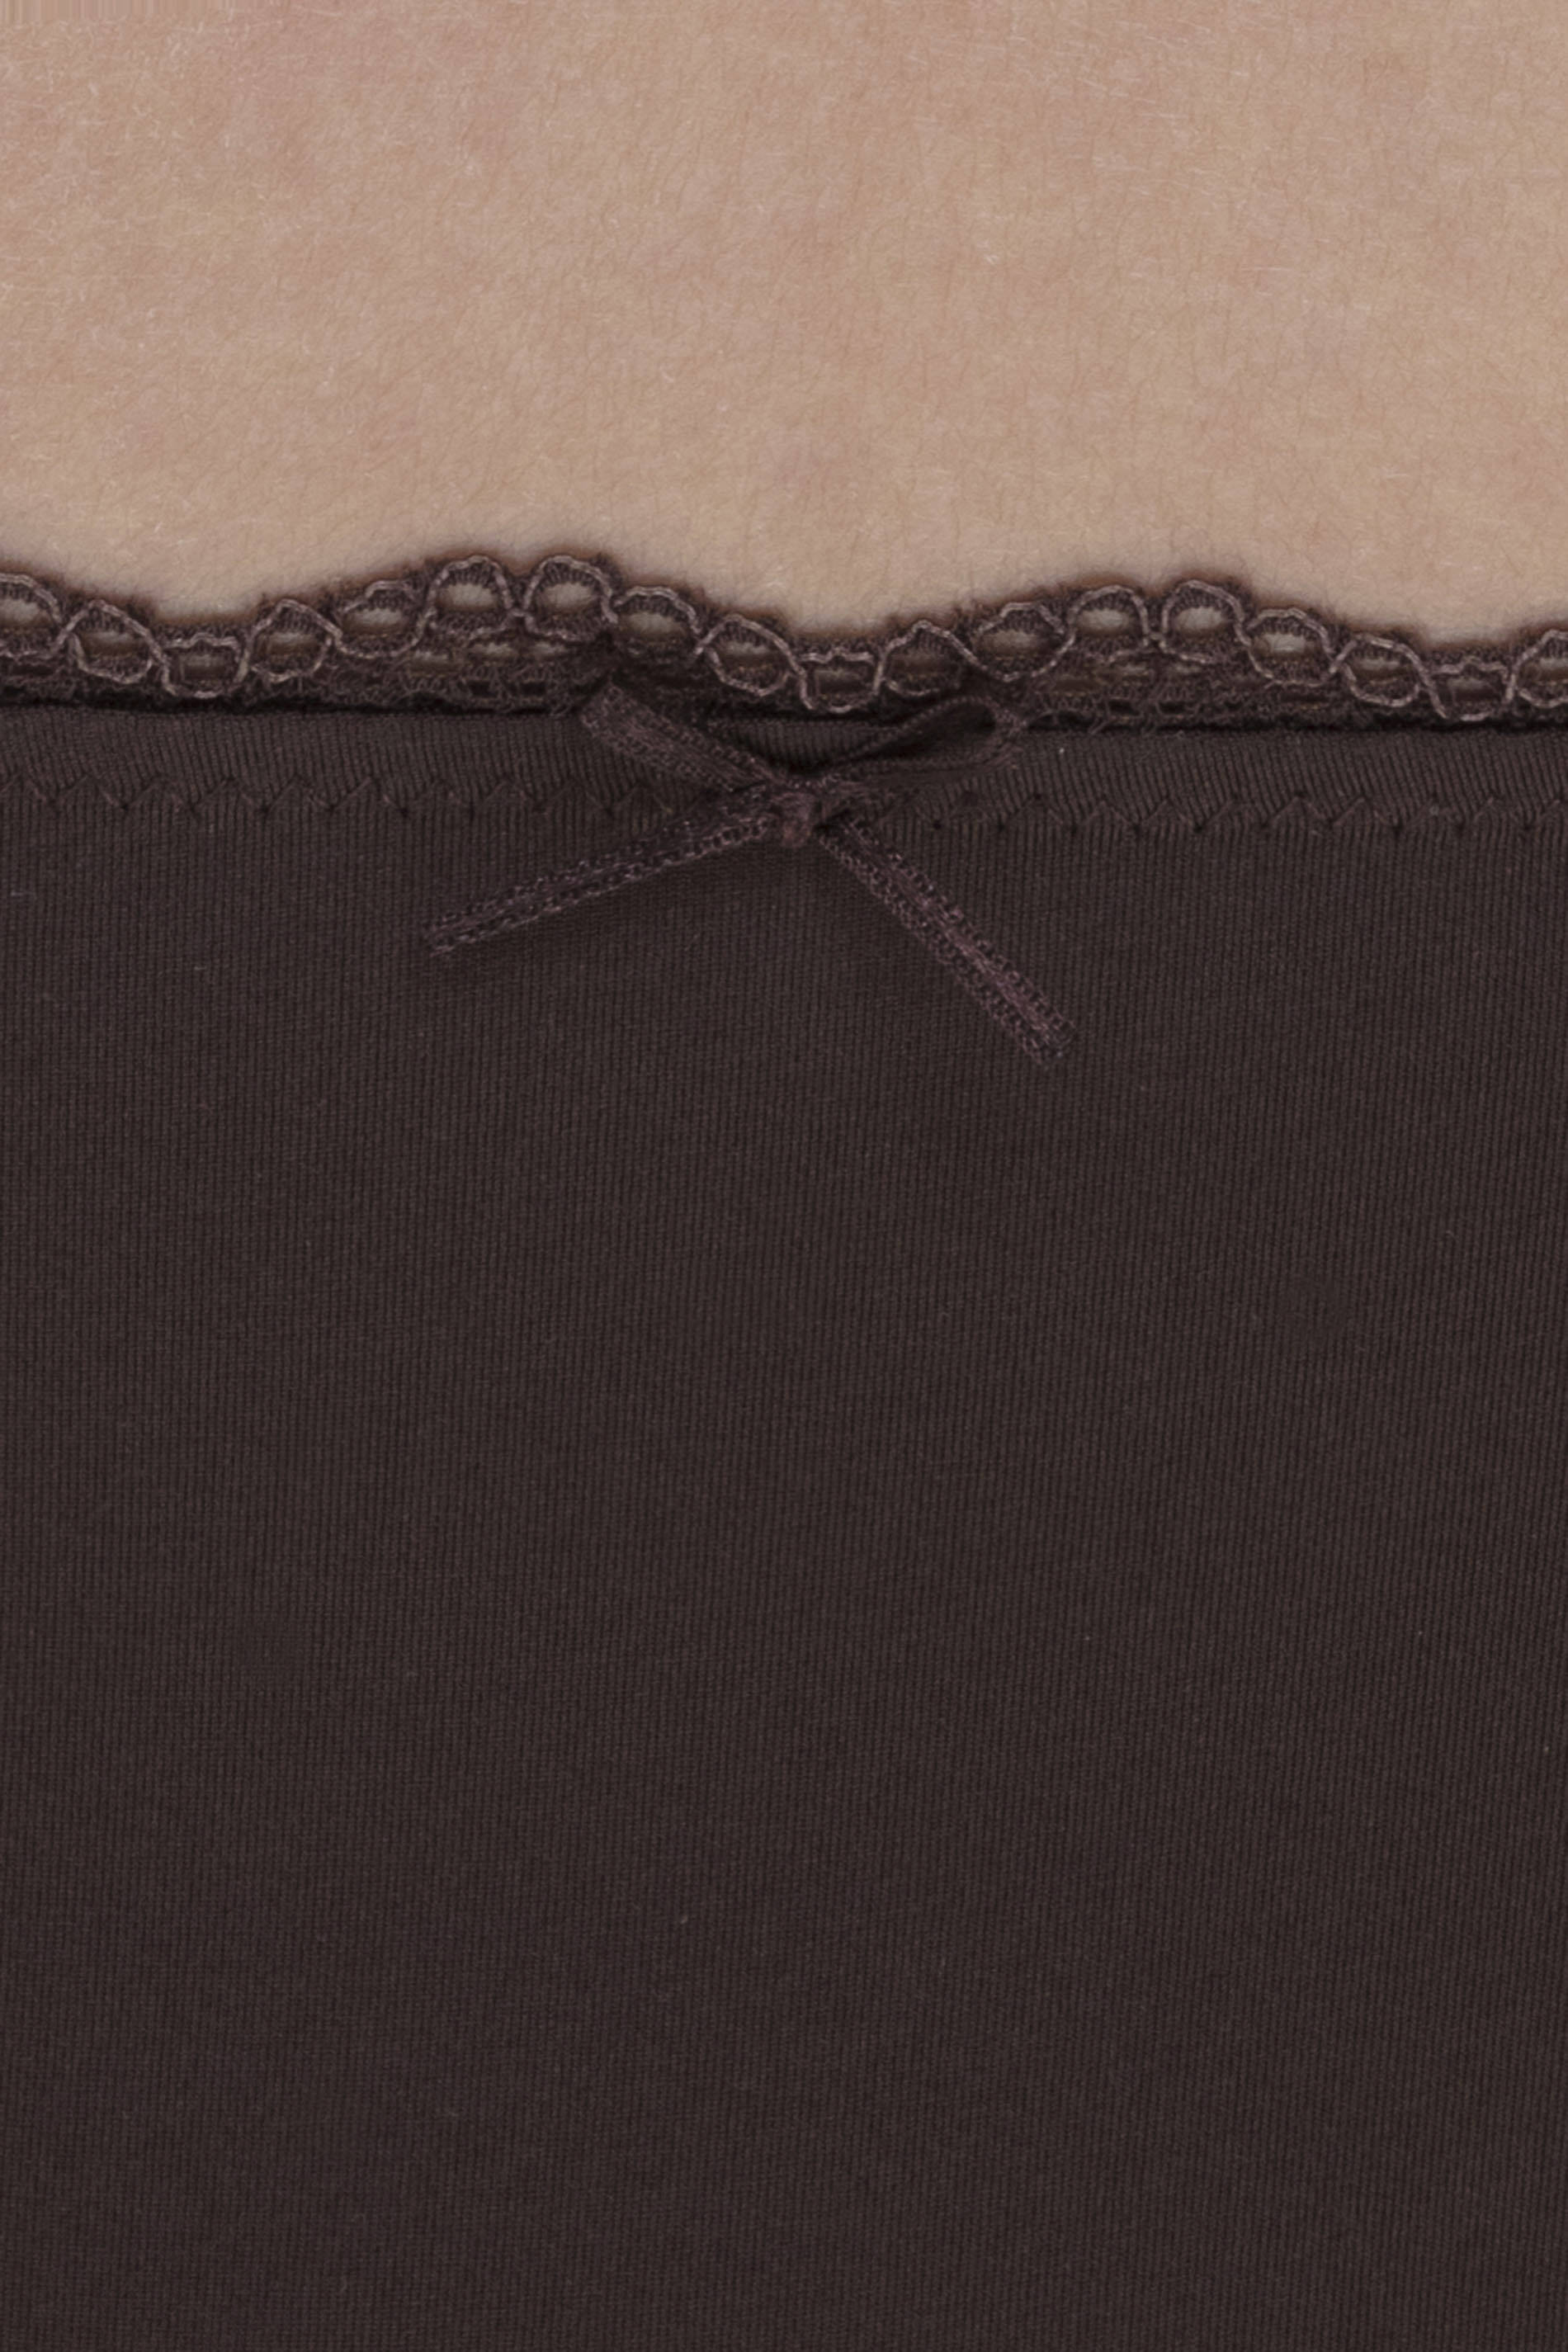 Hipster Liquorice Brown Serie Amorous Detail View 01 | mey®